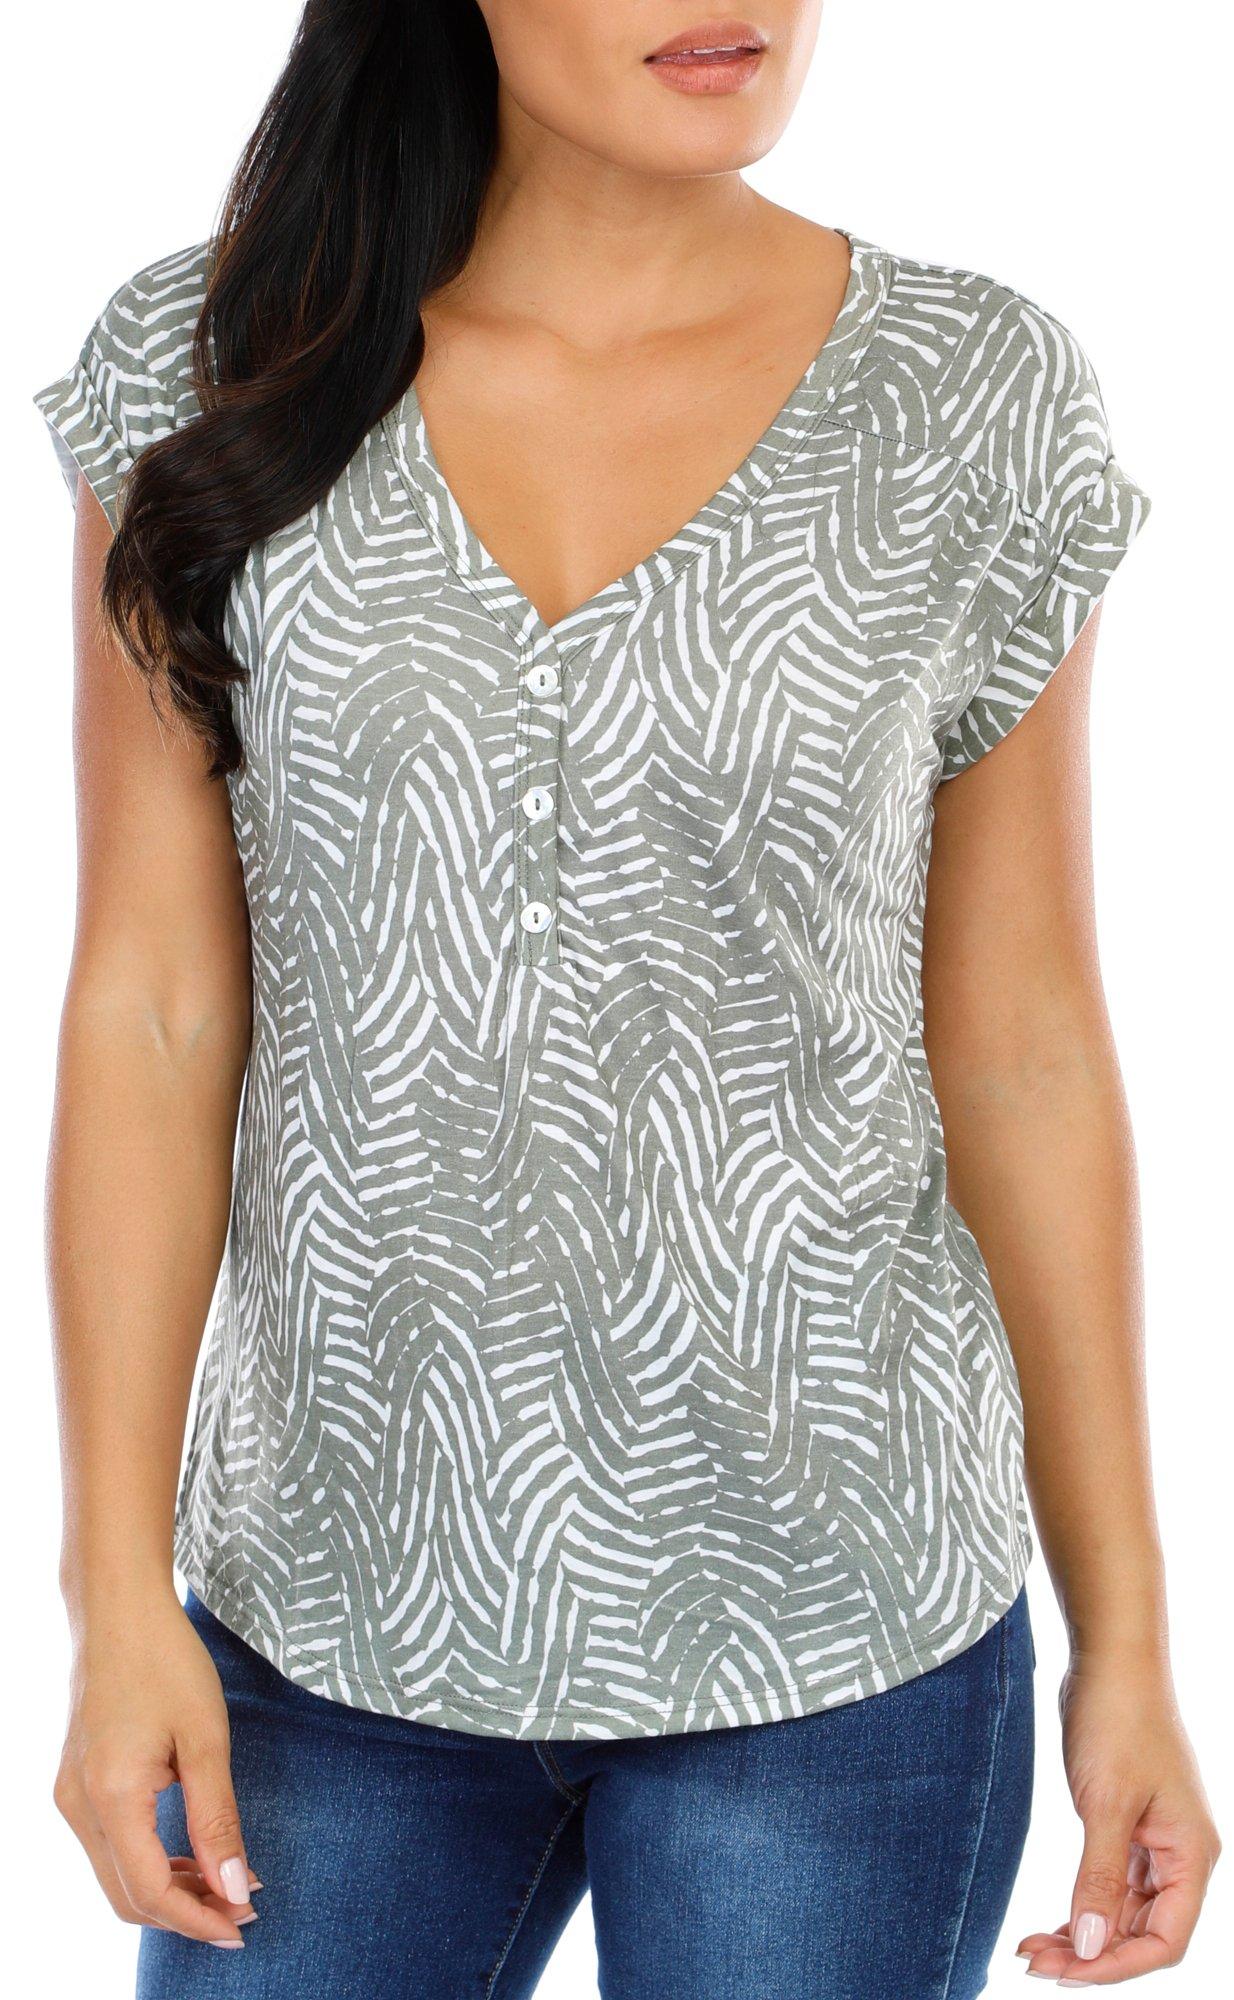 Women's Printed Knit Top